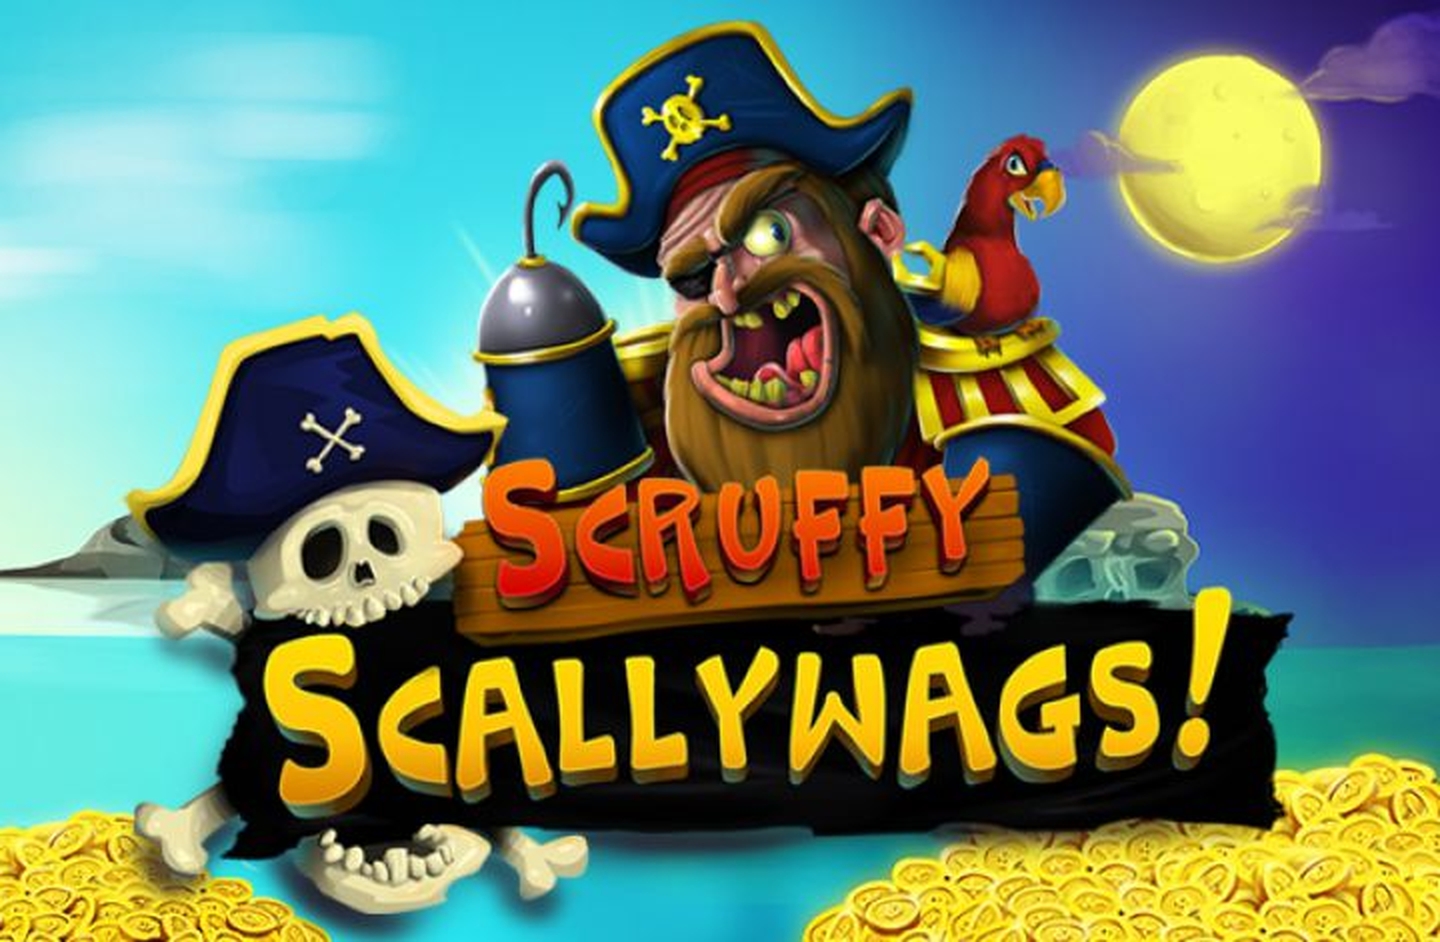 The Scruffy Scallywags Online Slot Demo Game by Habanero